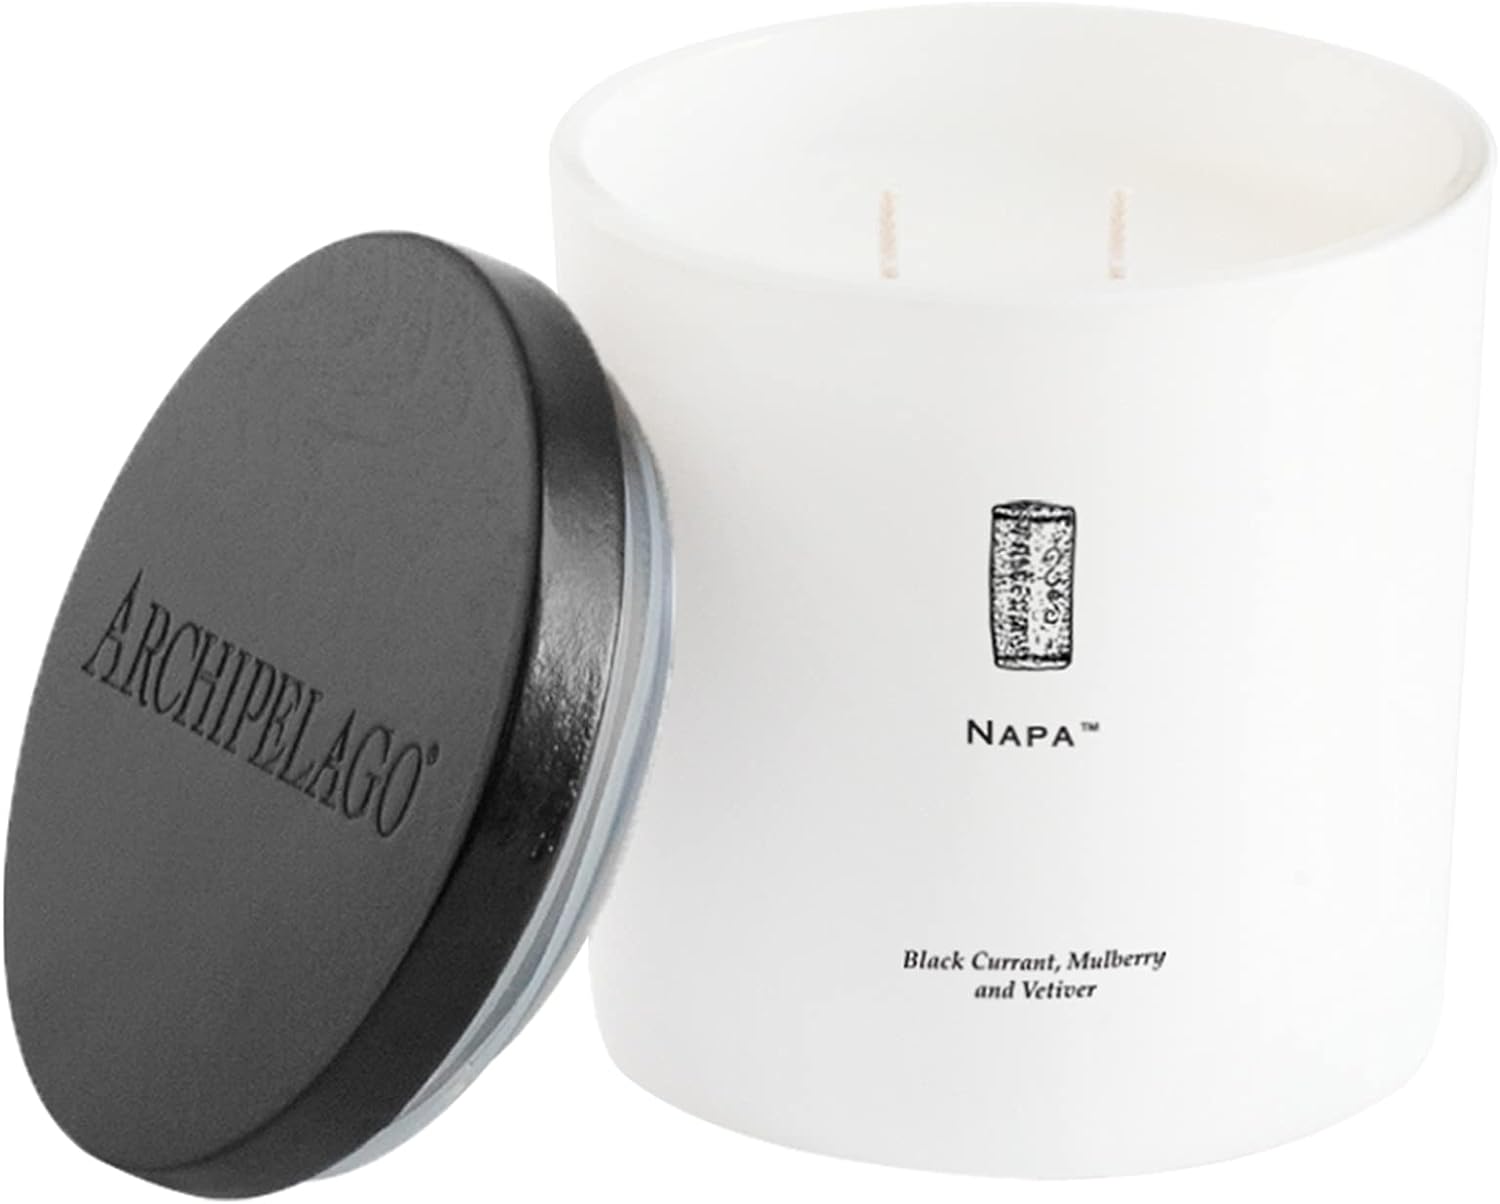 Archipelago Botanicals Napa Luxe Candle. Warm and Earthy Scent of Black Currant, Mulberry and Vetiver in an Elegant White Glass Jar. Coconut Wax and Double Wicks Burn 100 Hours (13 oz)